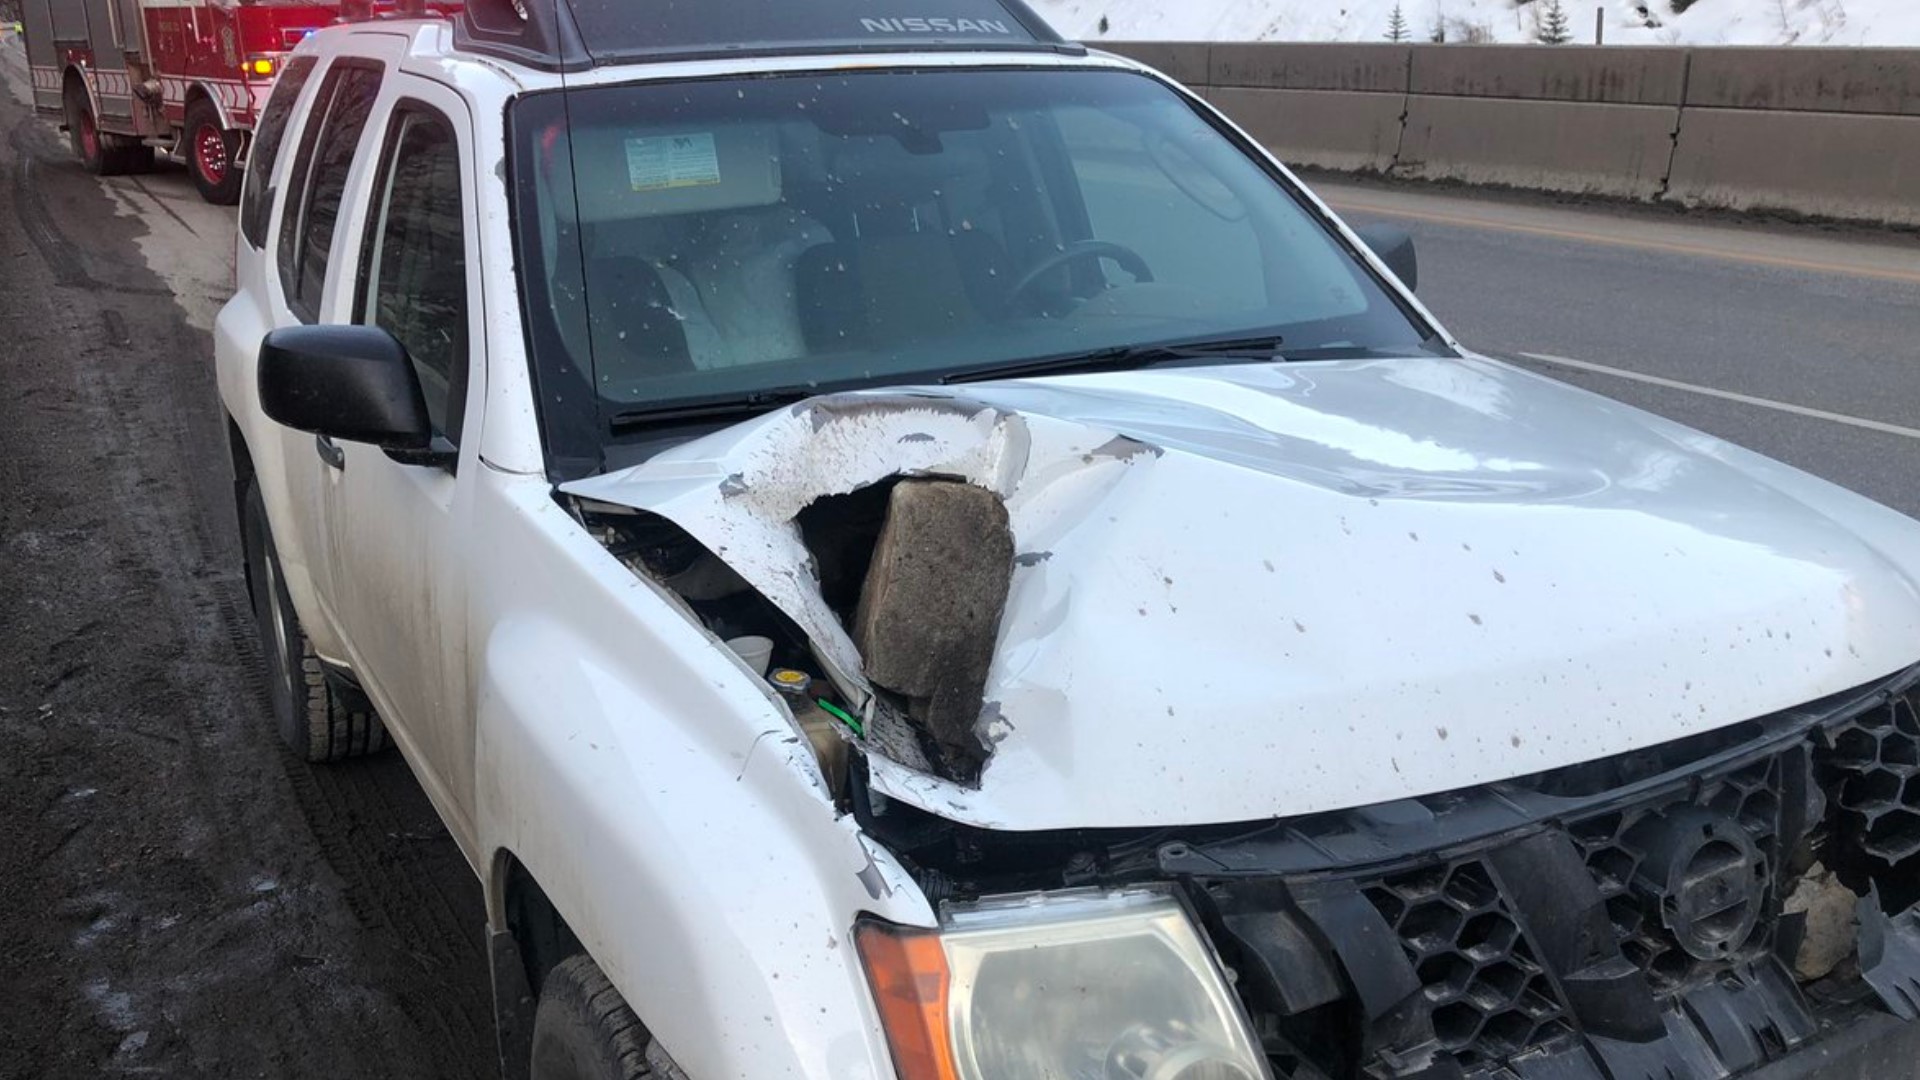 A vehicle’s front hood was hit by some of the falling rocks, but luckily, no one was injured.